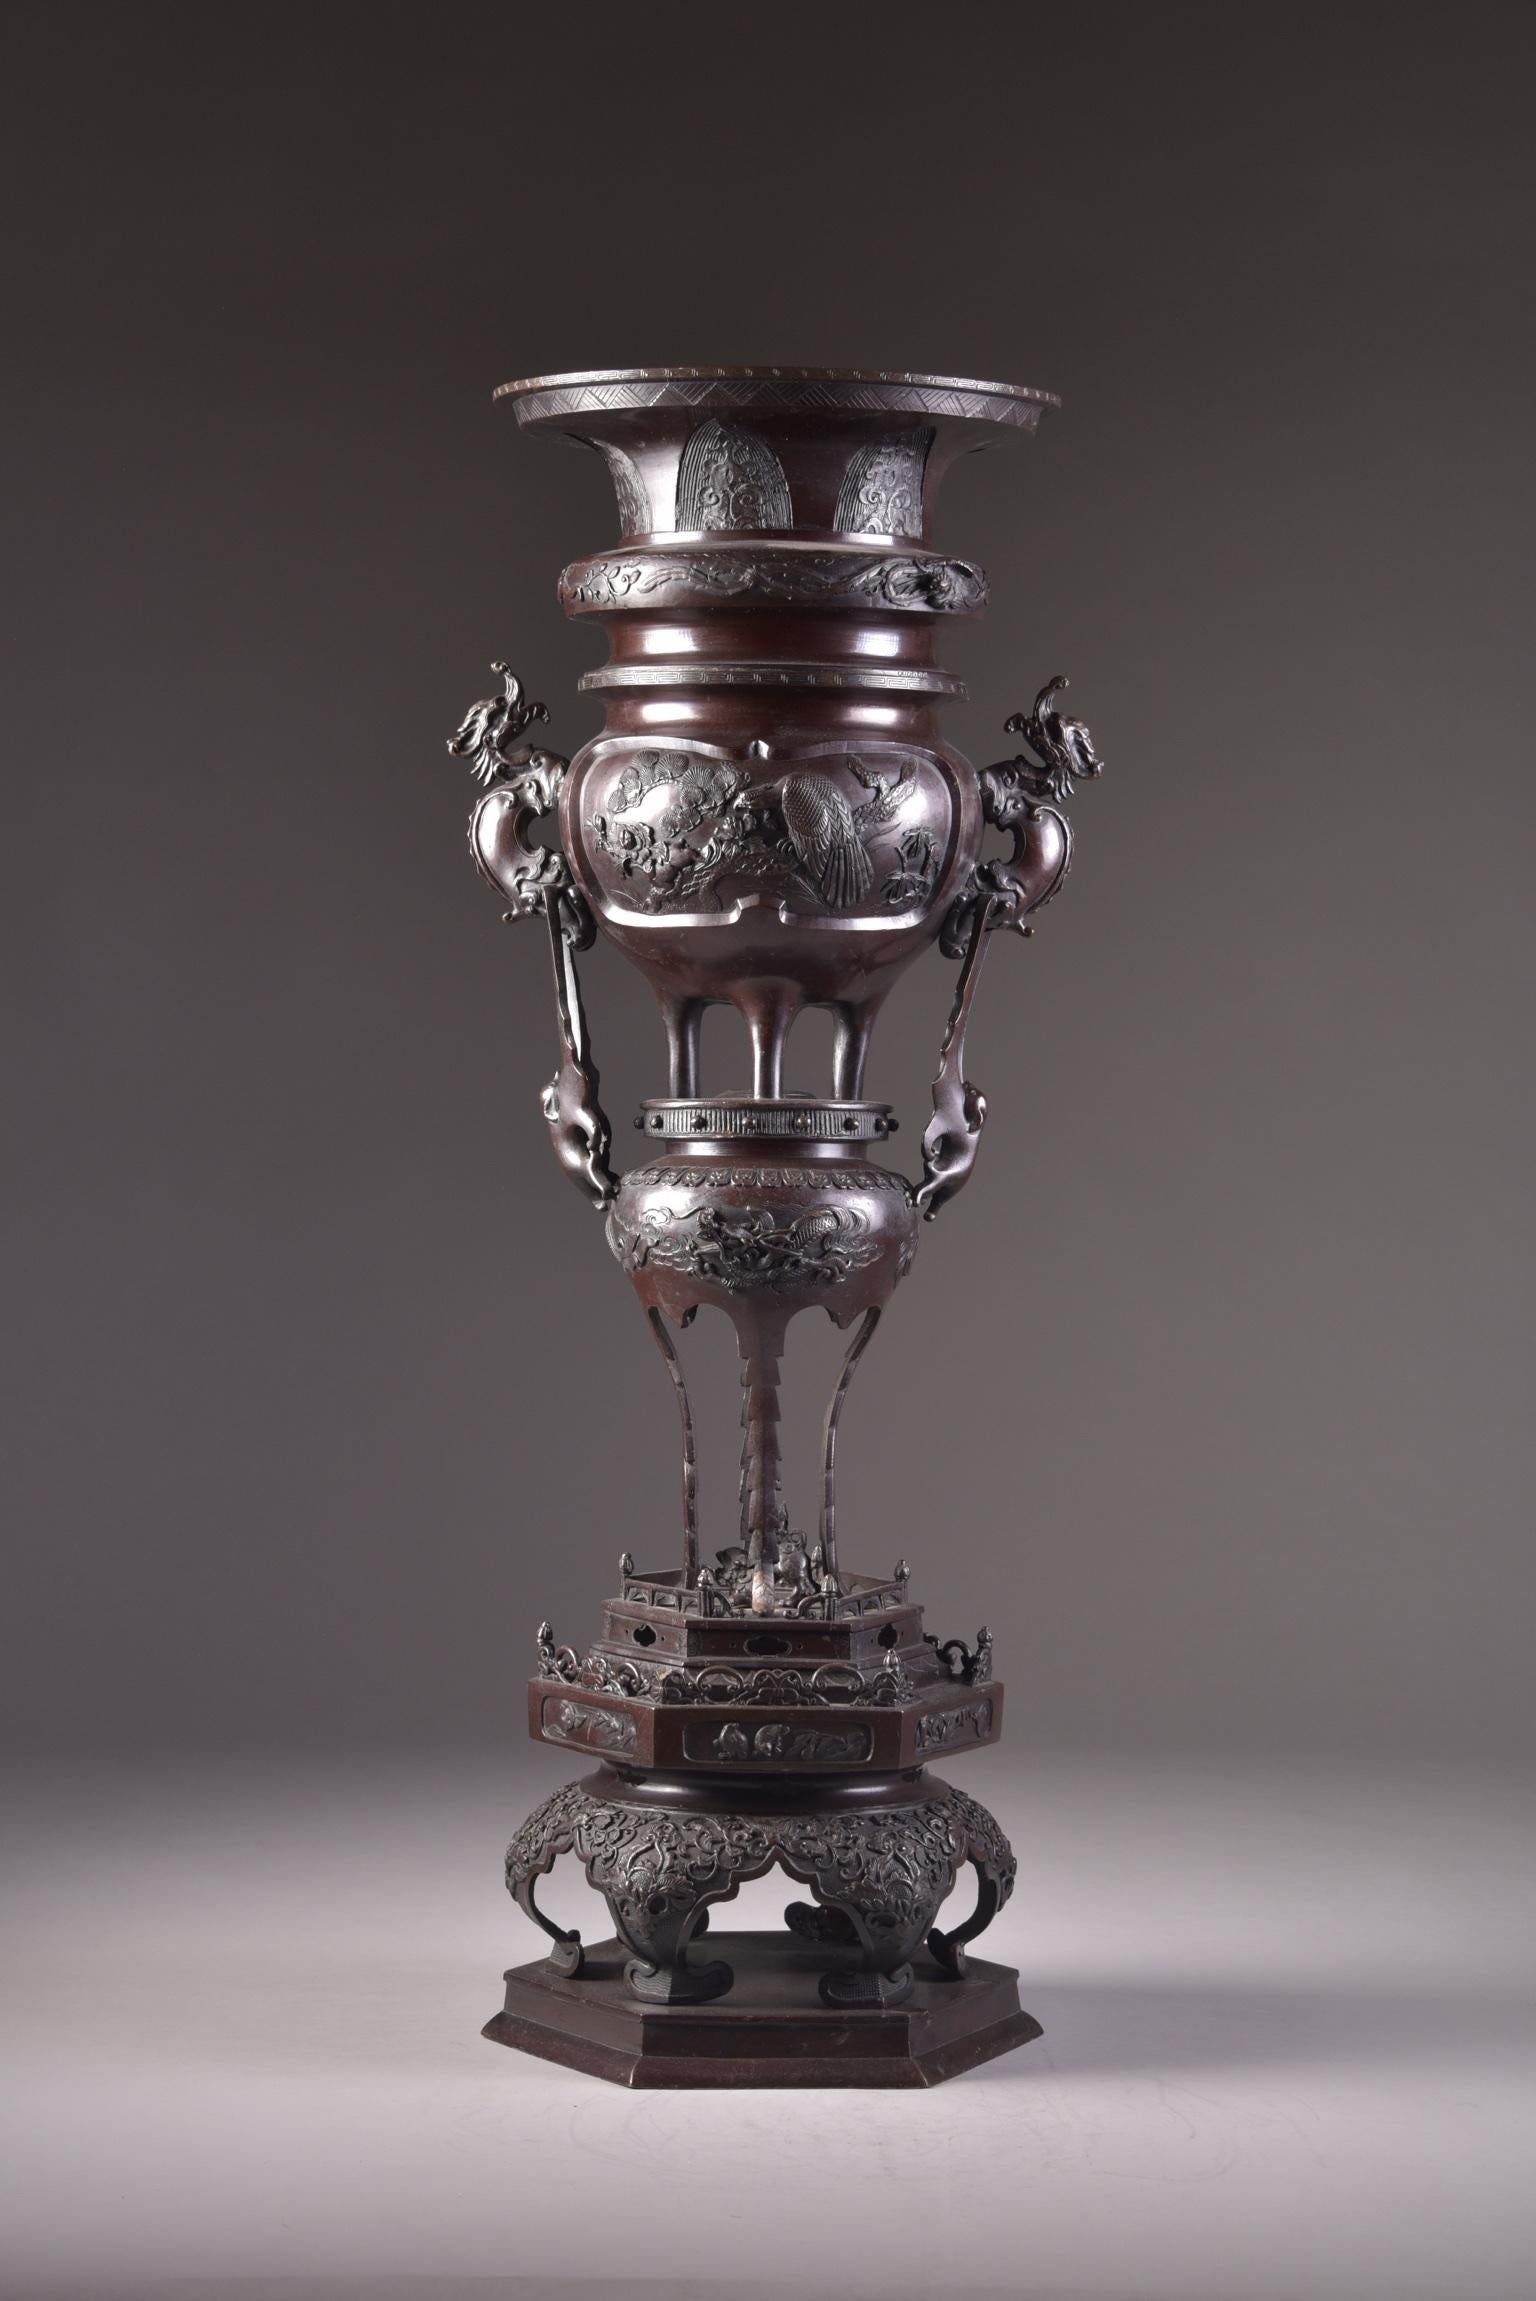 Japanese Large Bronze Vase with Imposant Reliefs, Japan, Meiji Period, Late 19th Century